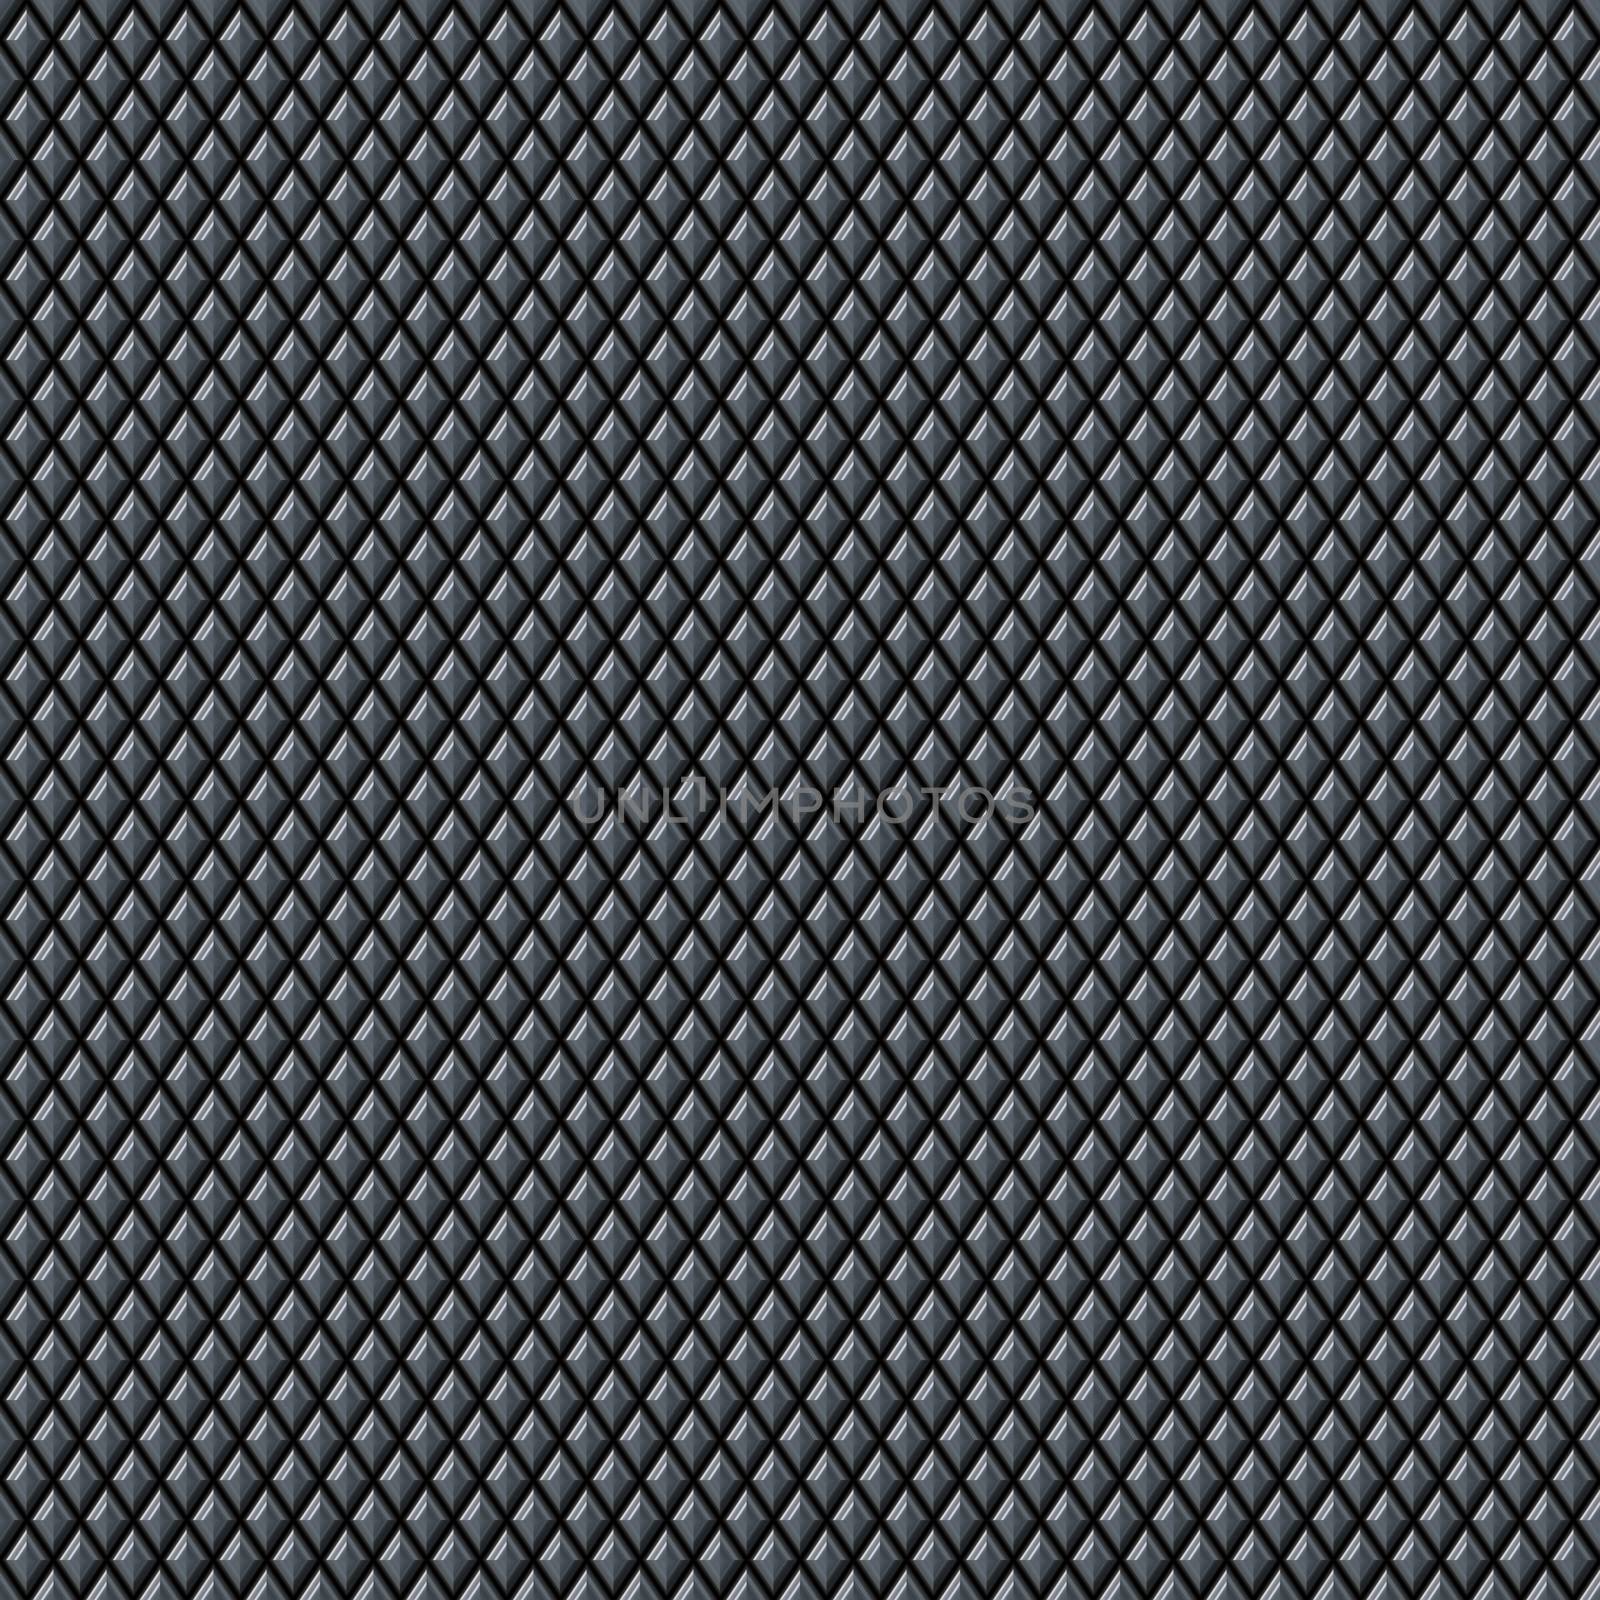 Seamless Diamond Metal Texture by graficallyminded